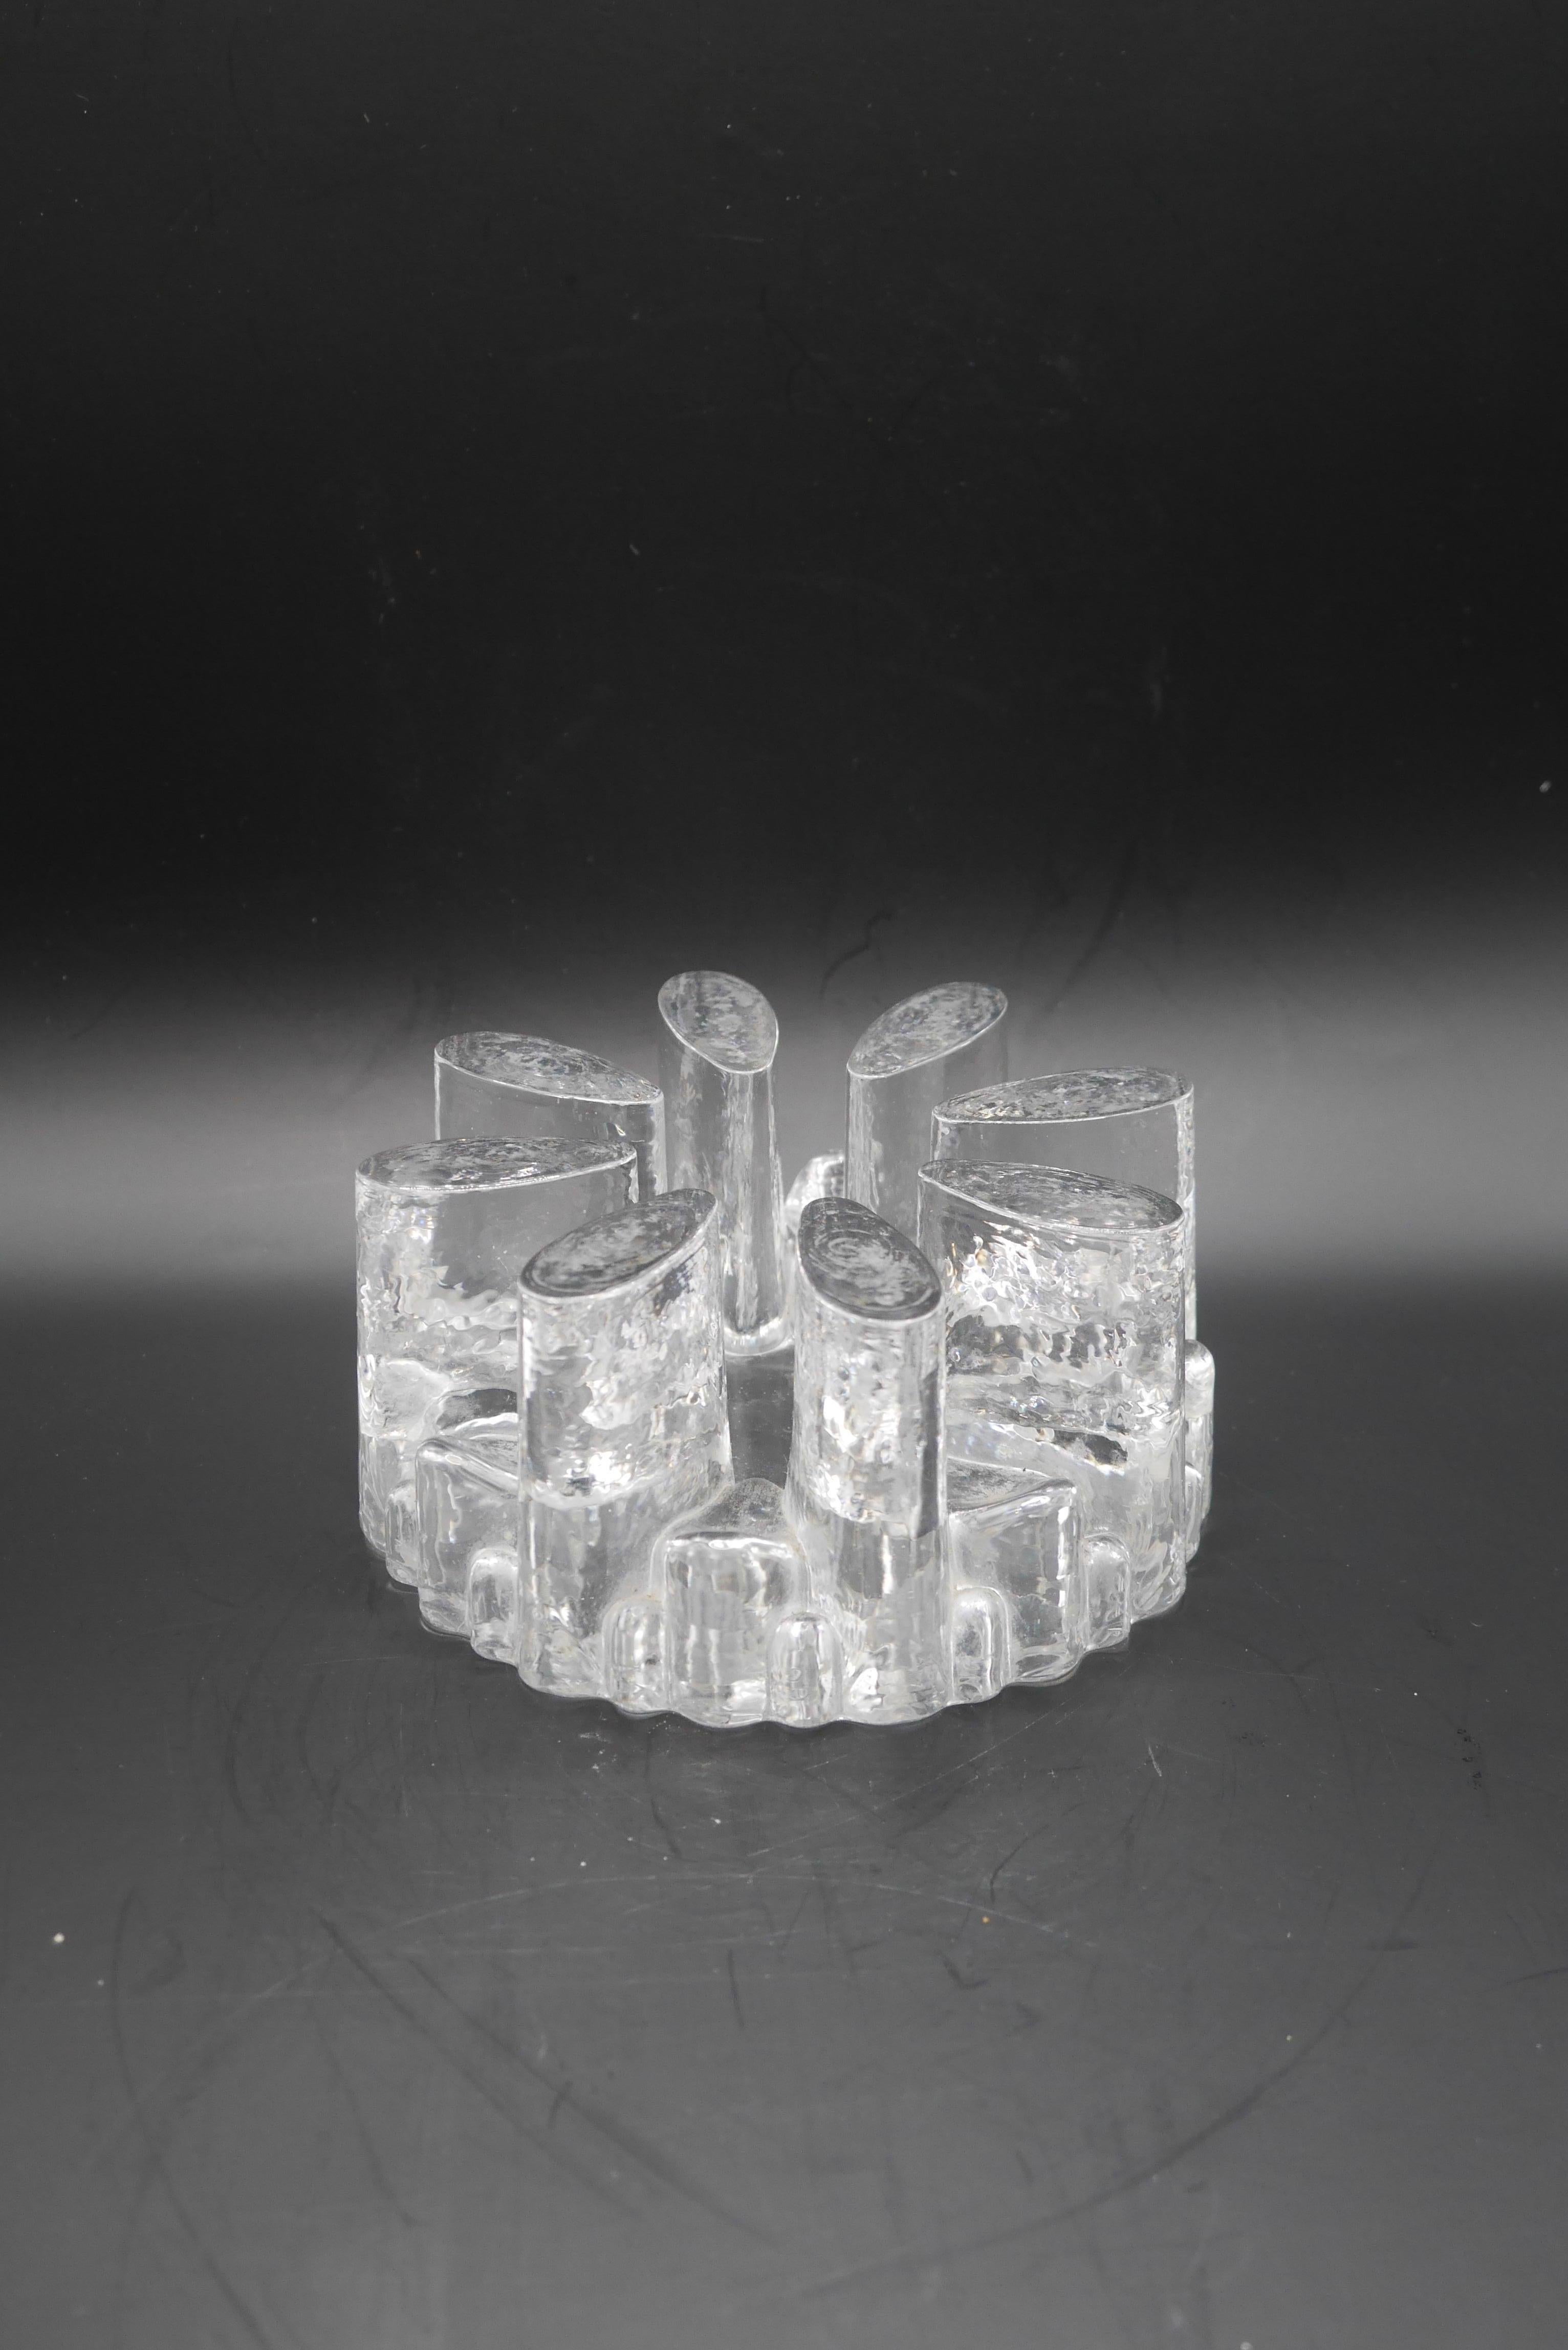 A stunning candle holder from Belmondo Glass, Georgshutte in West Germany, circa 1985. This item can also be used as a warmer for tea or coffee. Made from solid crystal, it produces a beautiful patterned light when a candle is lit inside it.